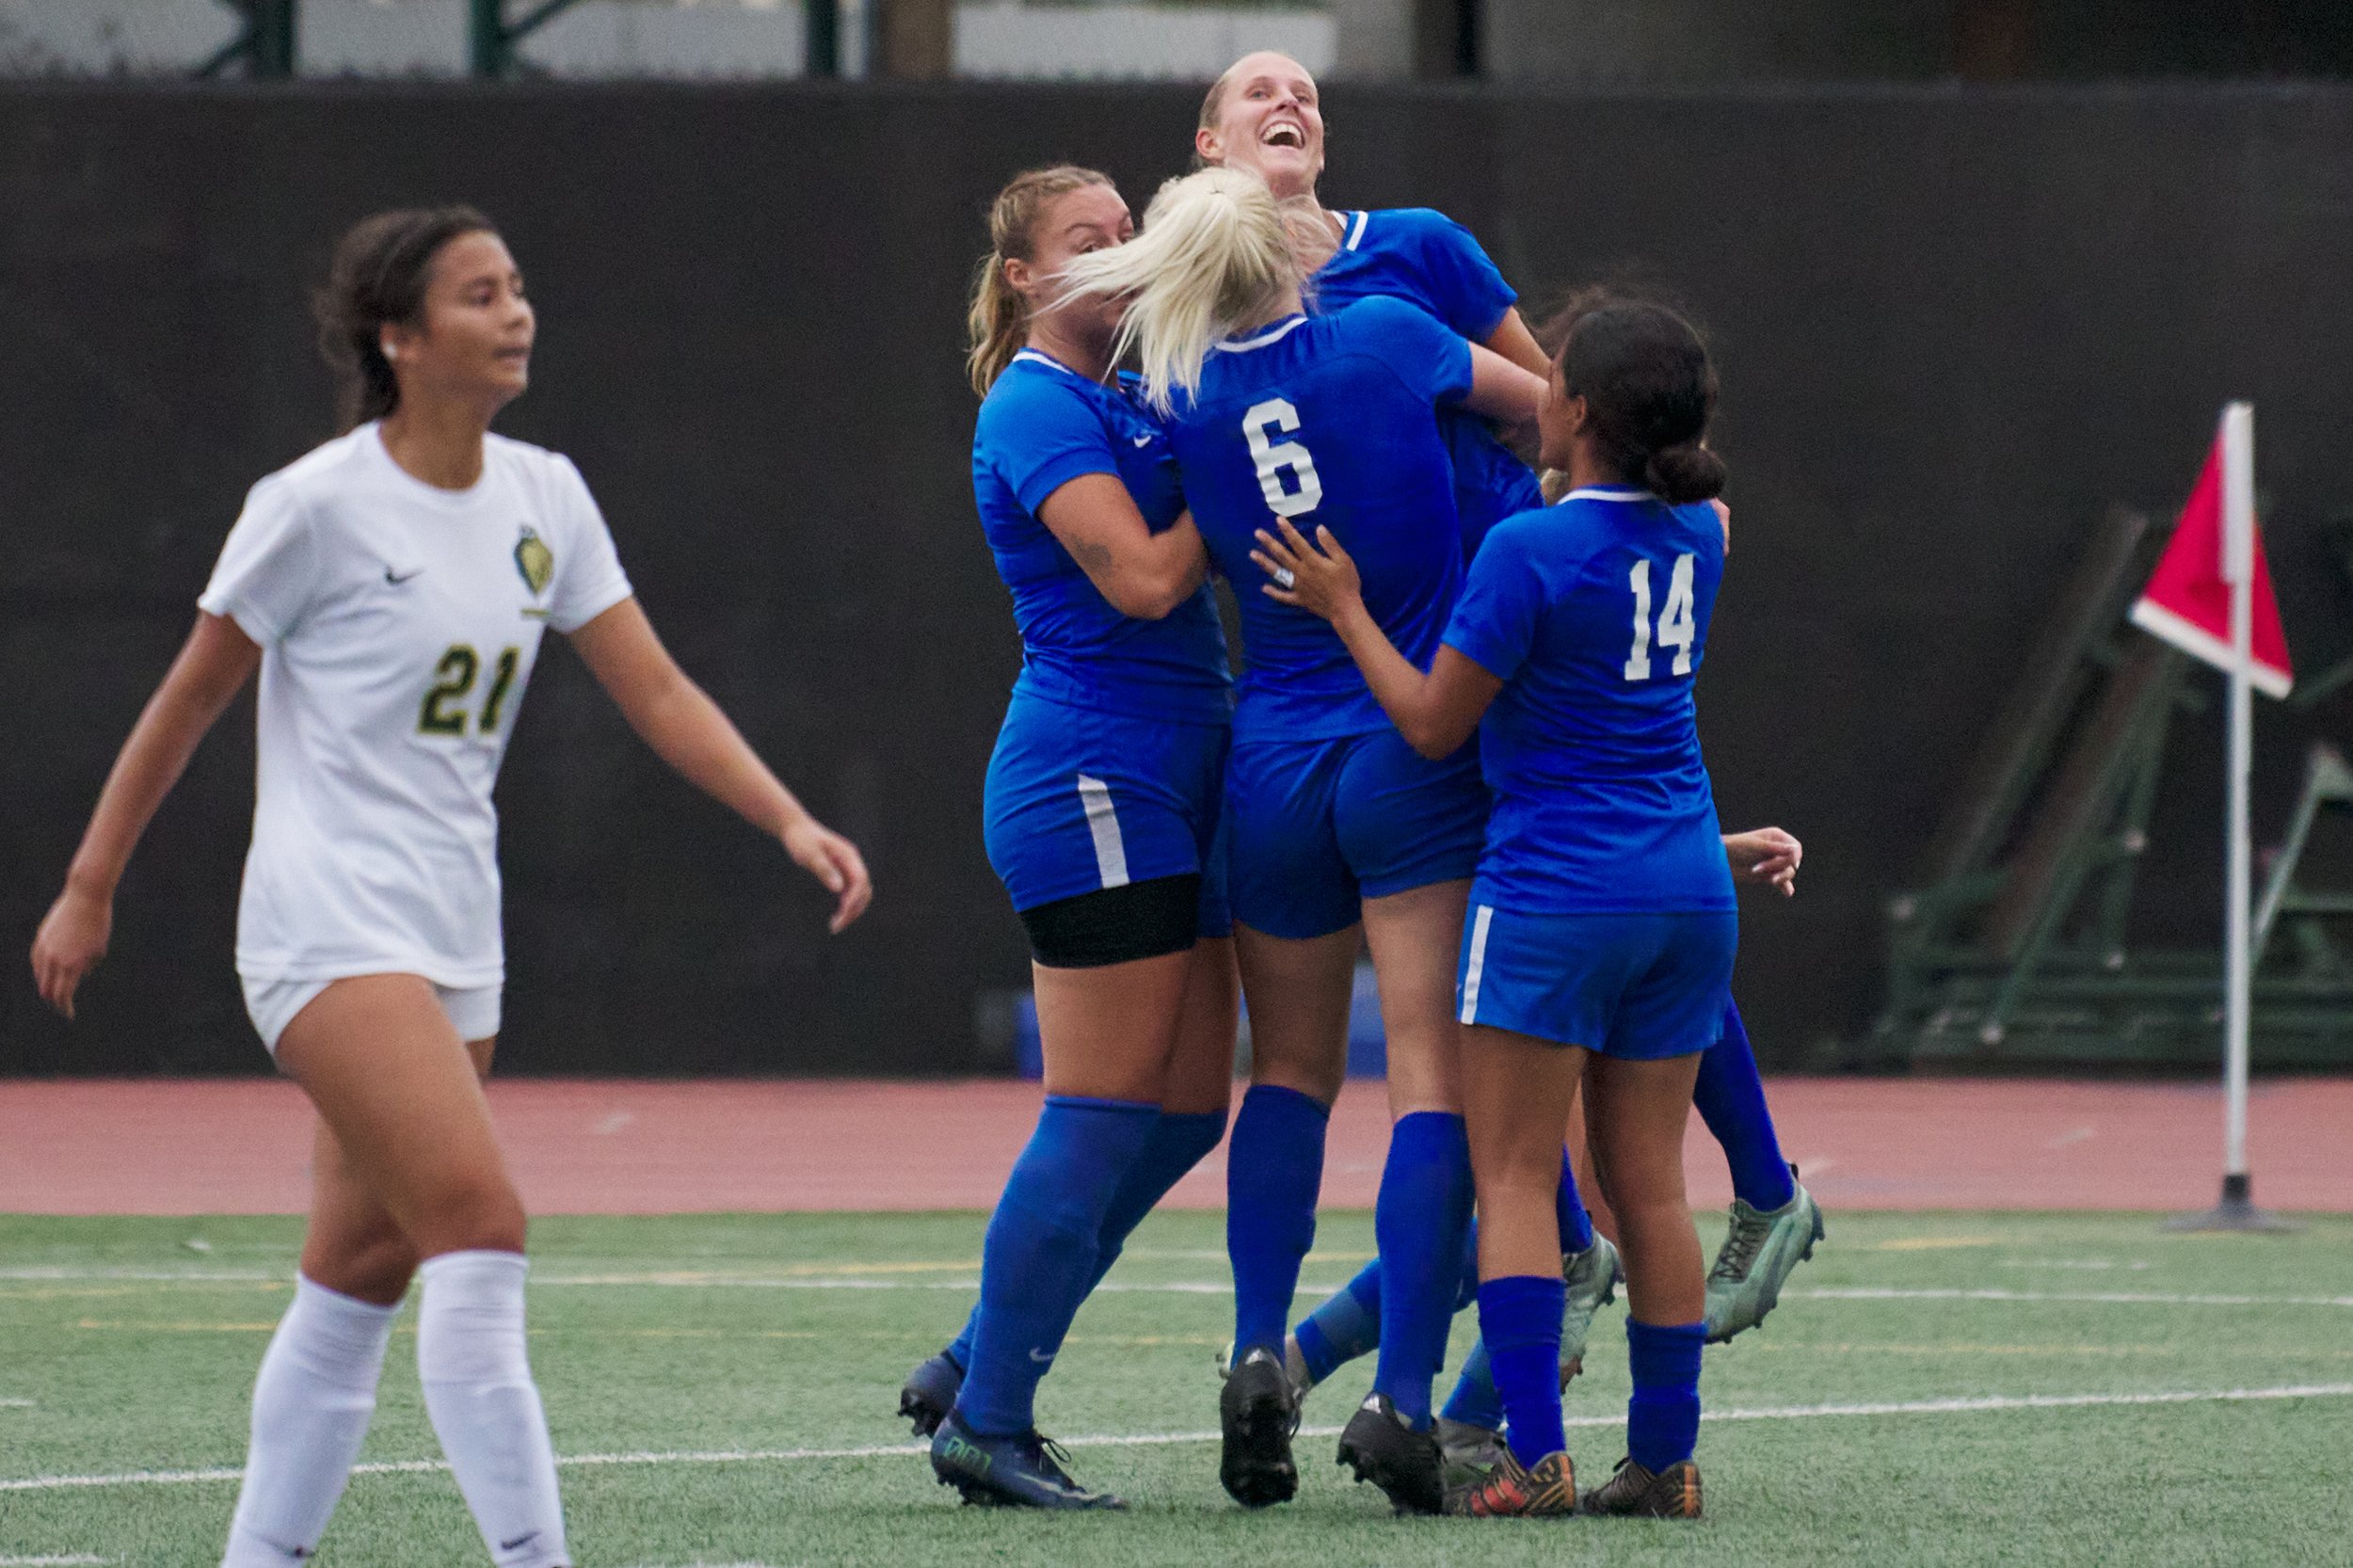  Members of the Santa Monica College Corsairs Women's Soccer team pick up Emma Rierstam in celebration of her goal during the match against the Los Angeles Valley College Monarchs on Tuesday, Nov. 1, 2022, at Corsair Field in Santa Monica, Calif. The